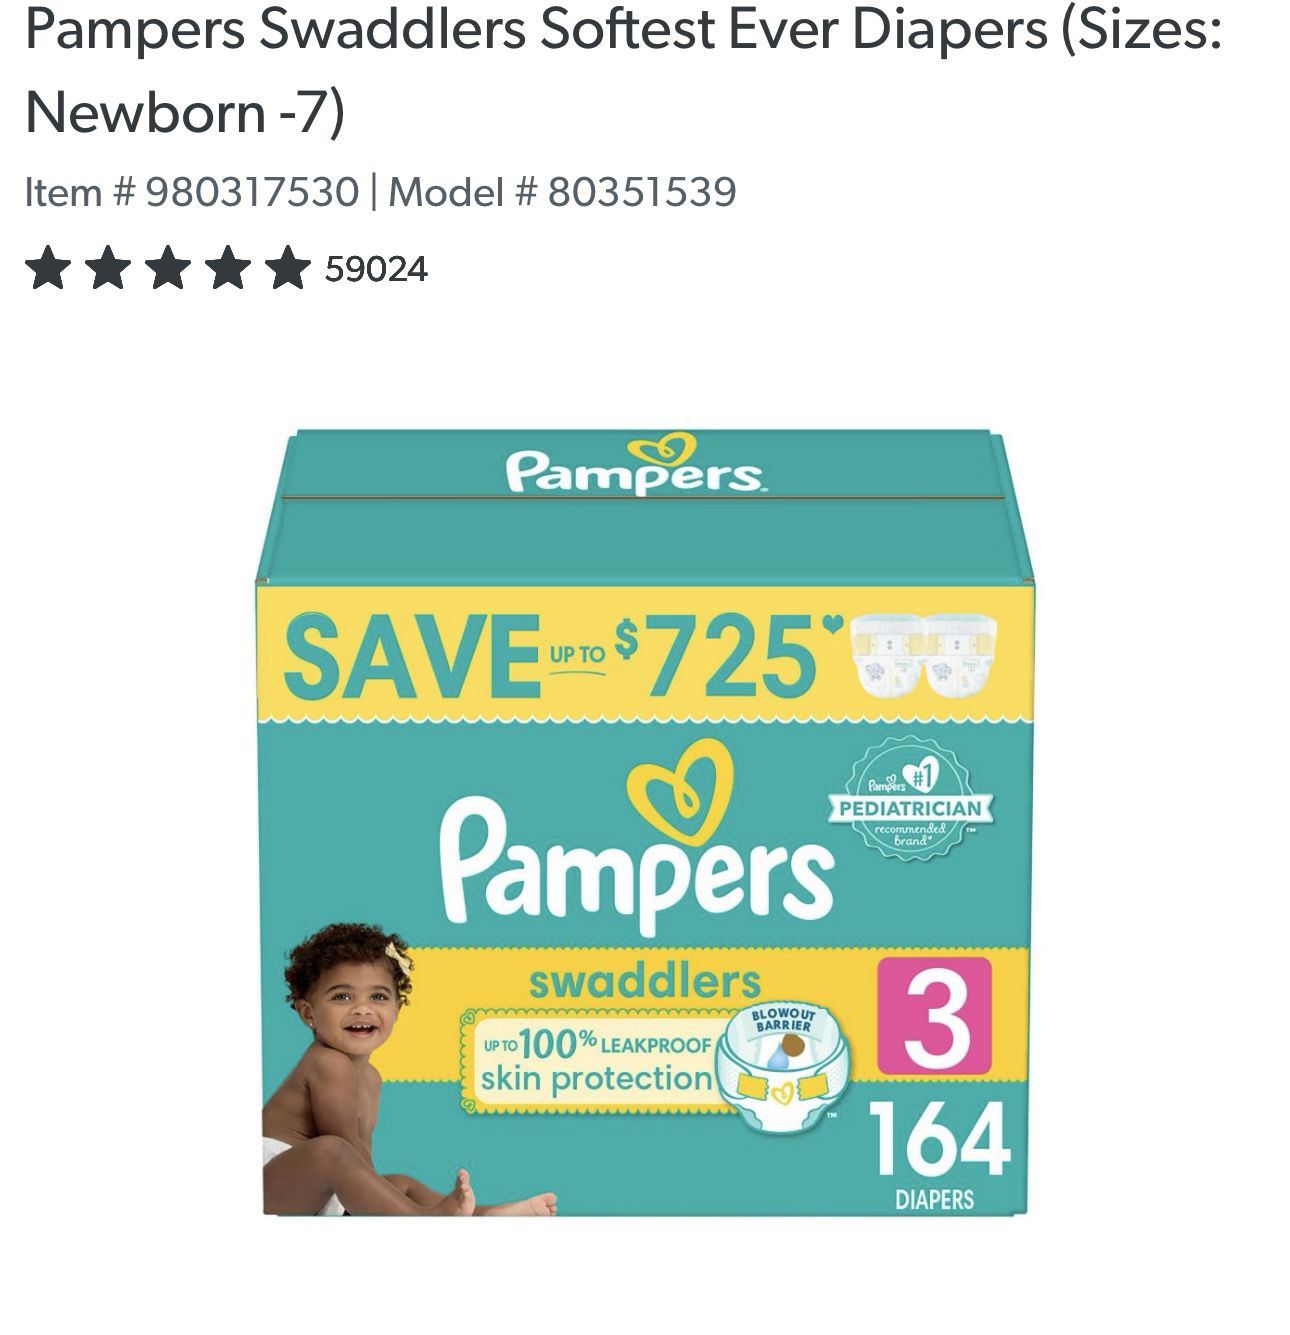 Pampers Swaddlers Softest Ever Diapers (Sizes: Newborn -7)